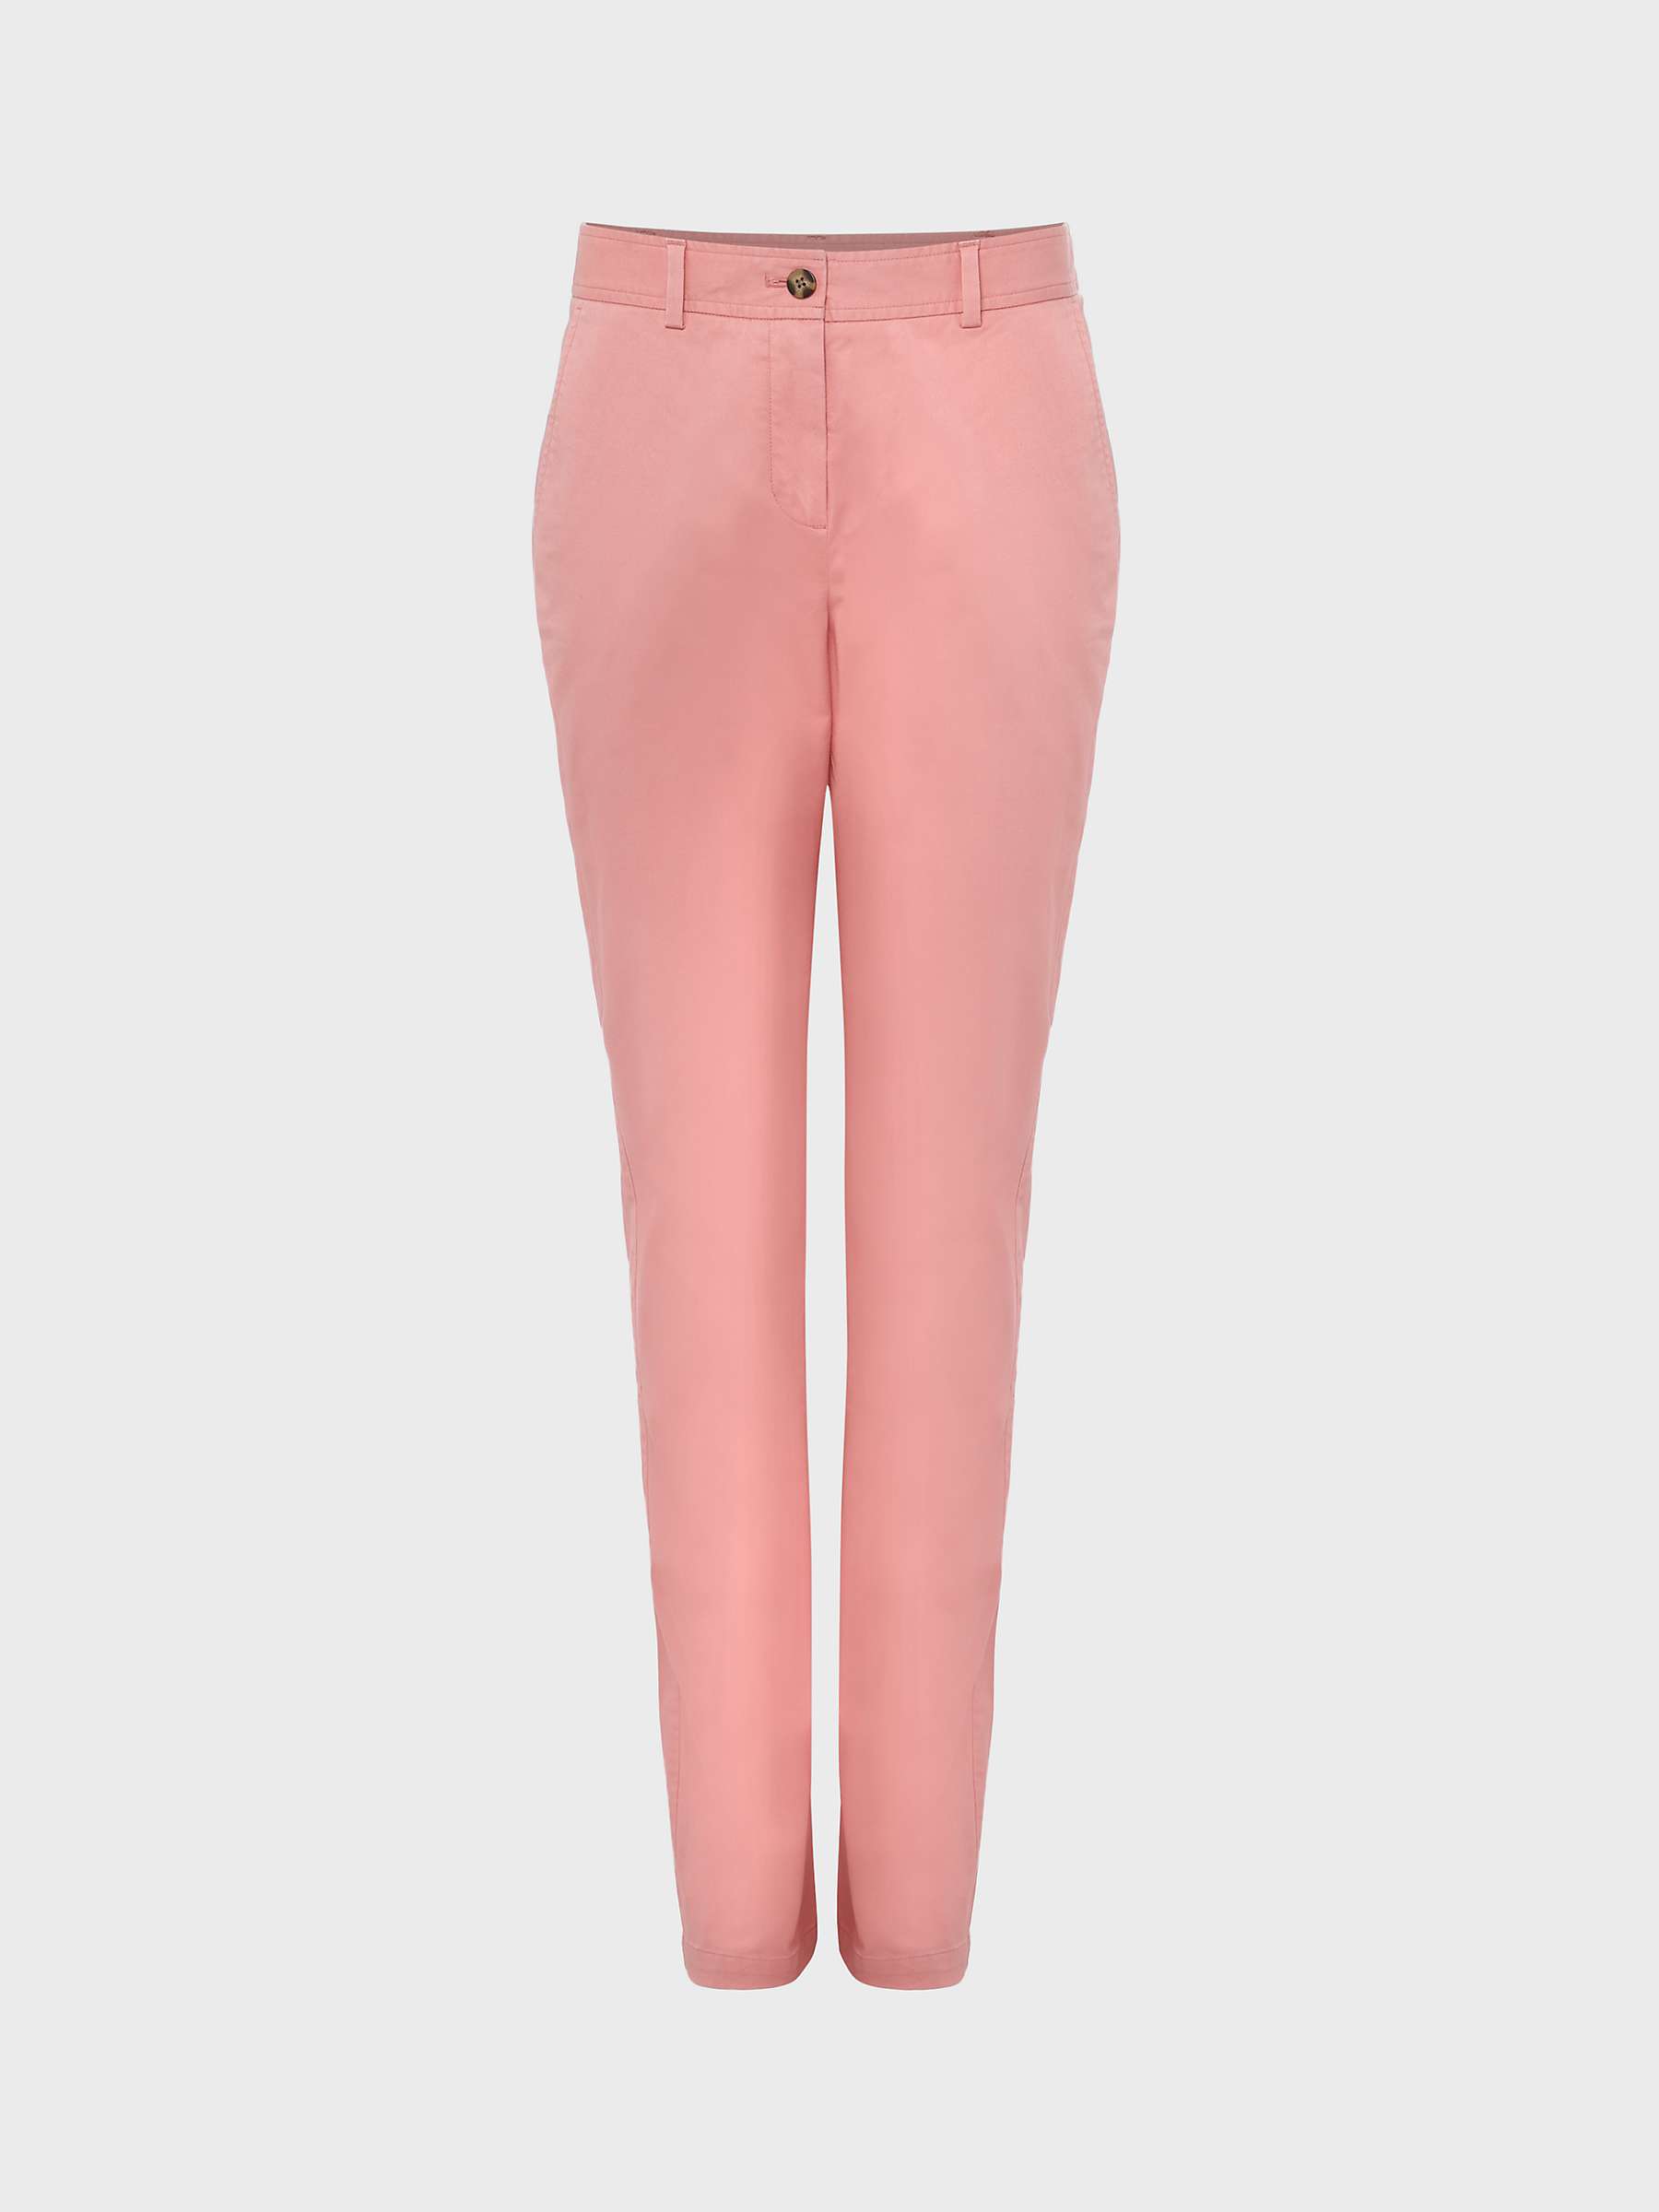 Buy Hobbs Courtney Chinos Online at johnlewis.com